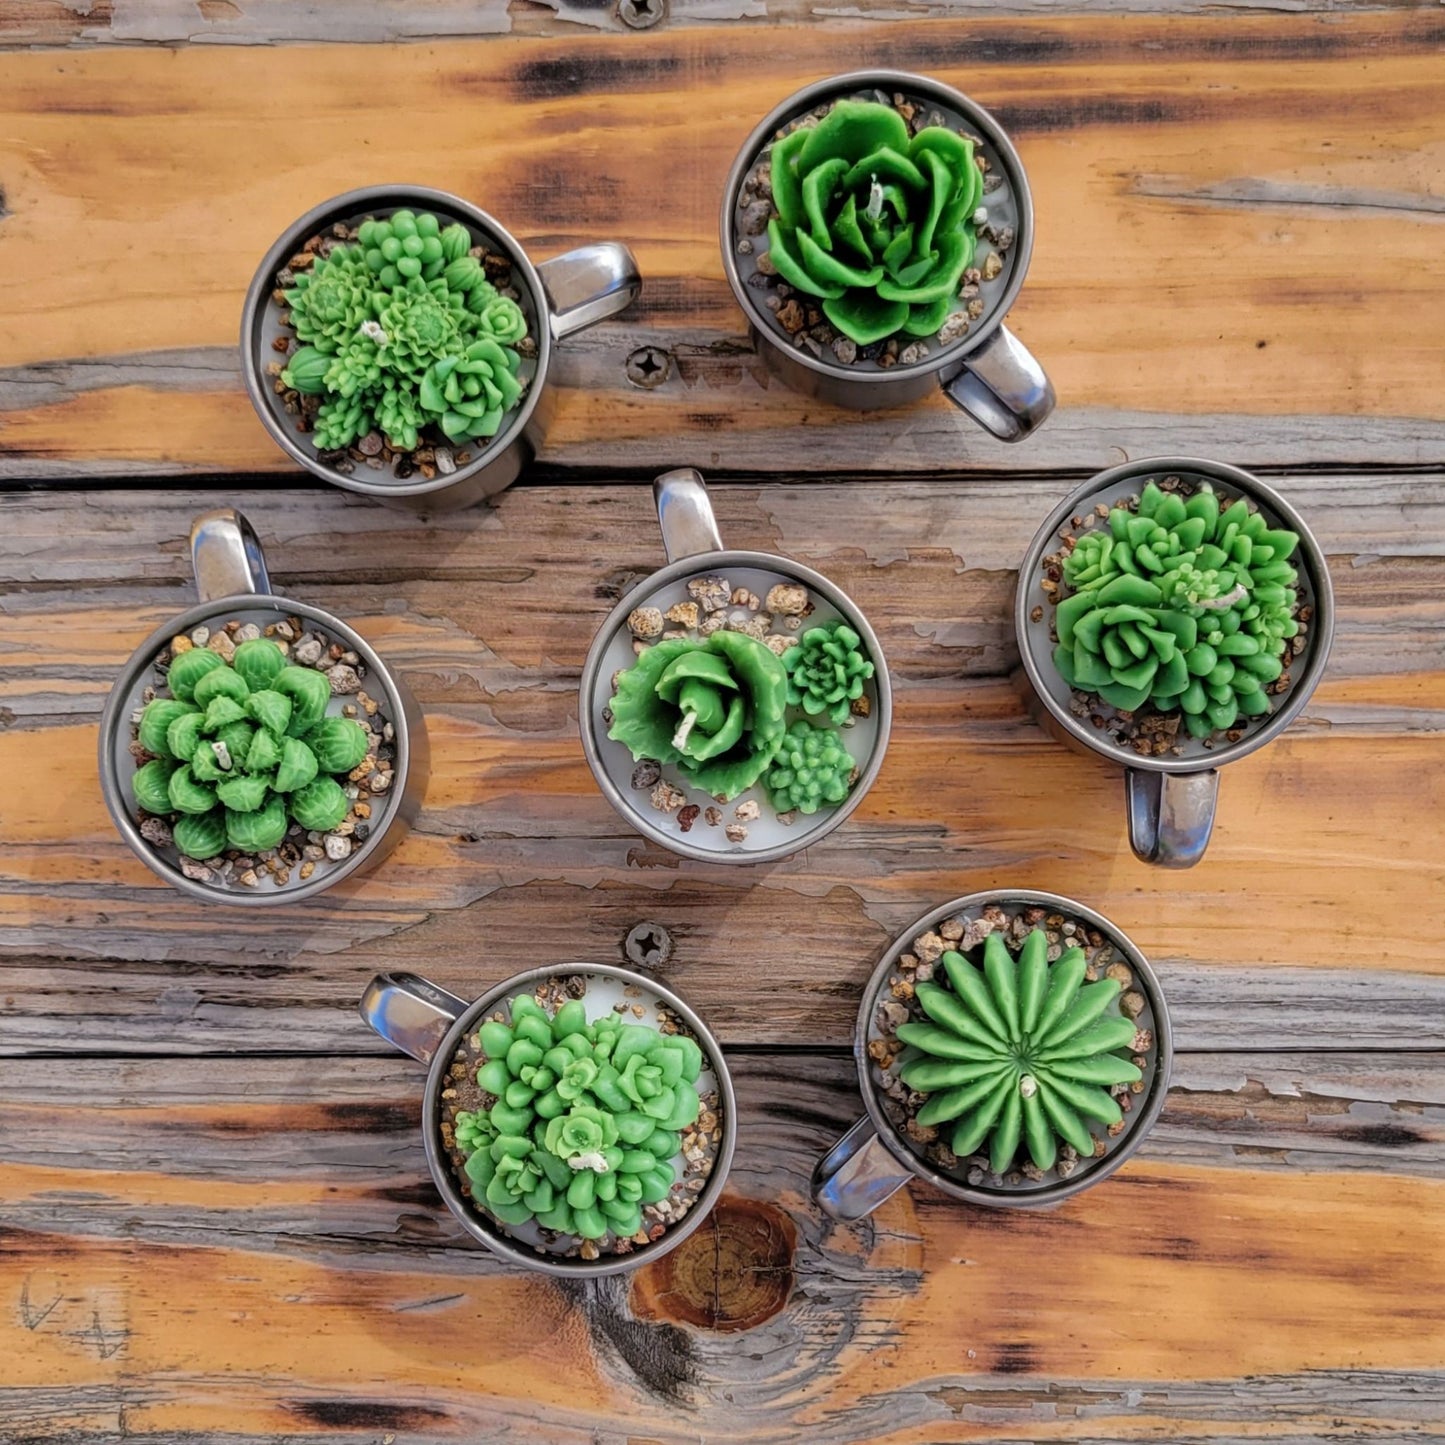 Seven handmade cactus candles in stainless steel mug.